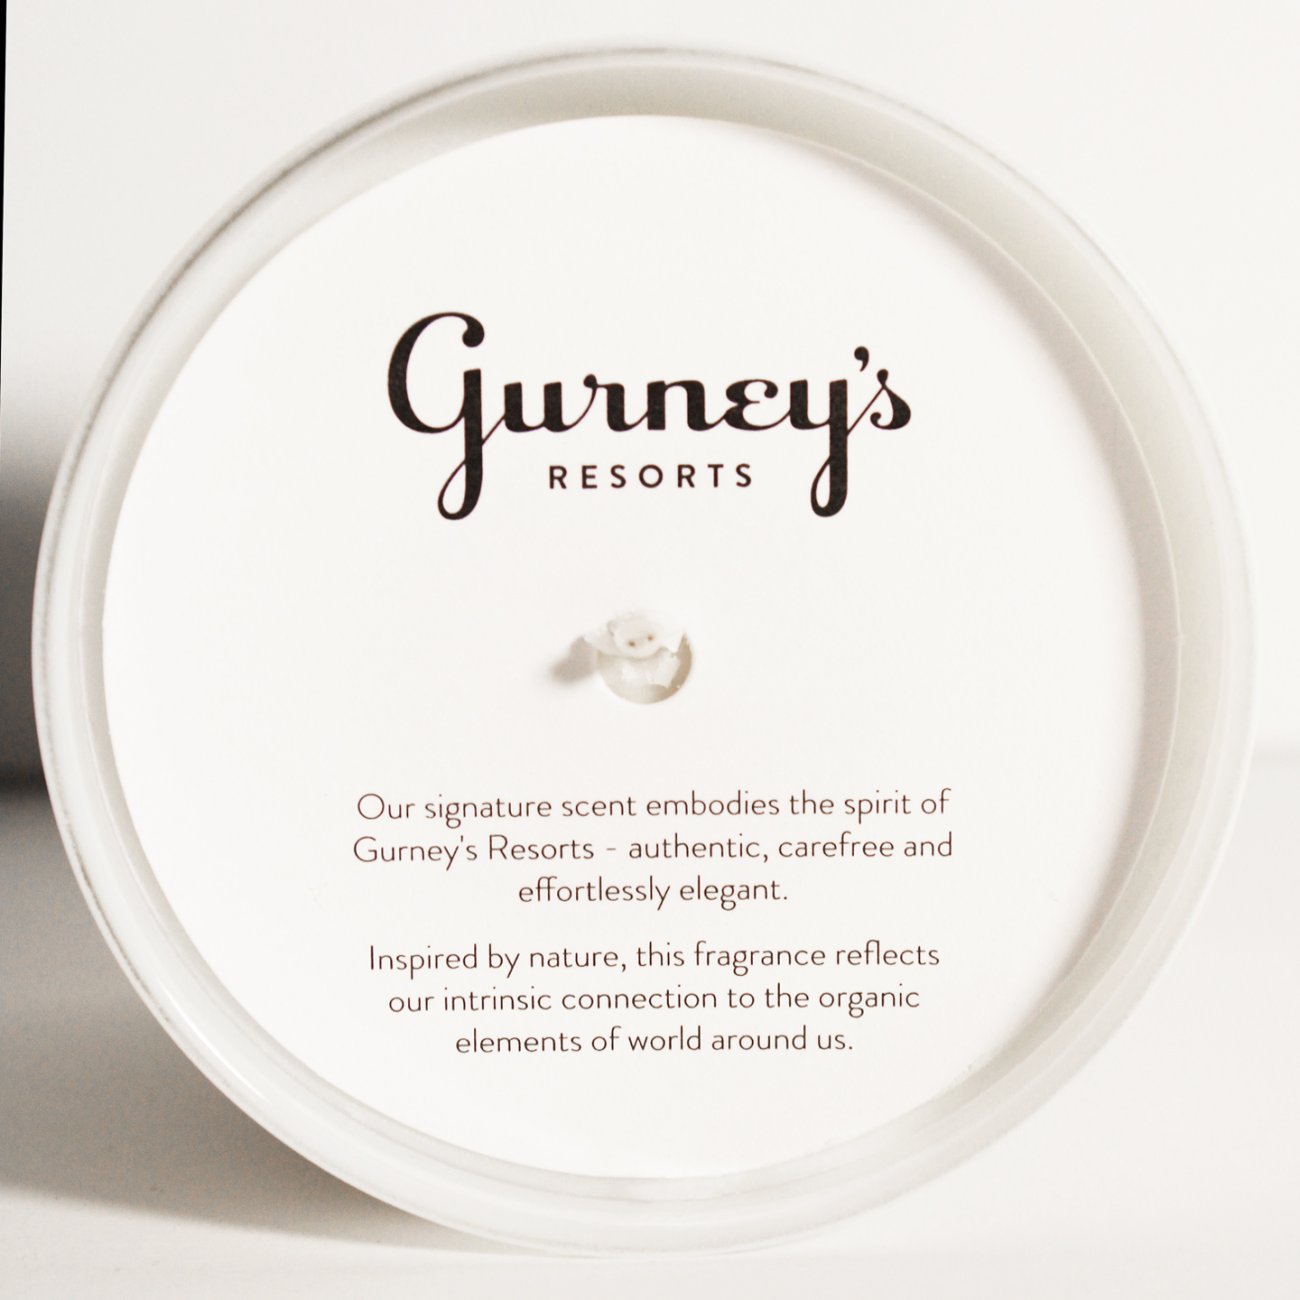 A top view of the Gurney's Resorts Signature Candle